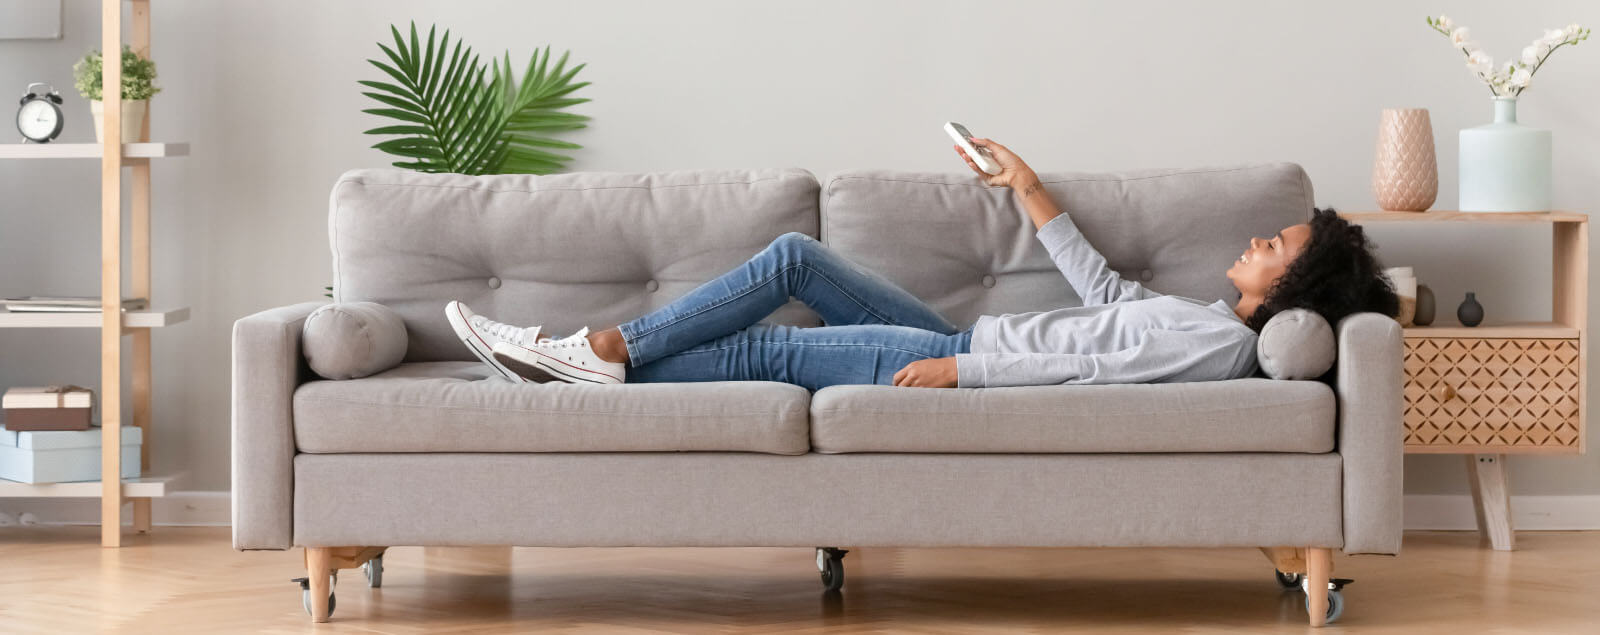 Lady laid on sofa with remote control